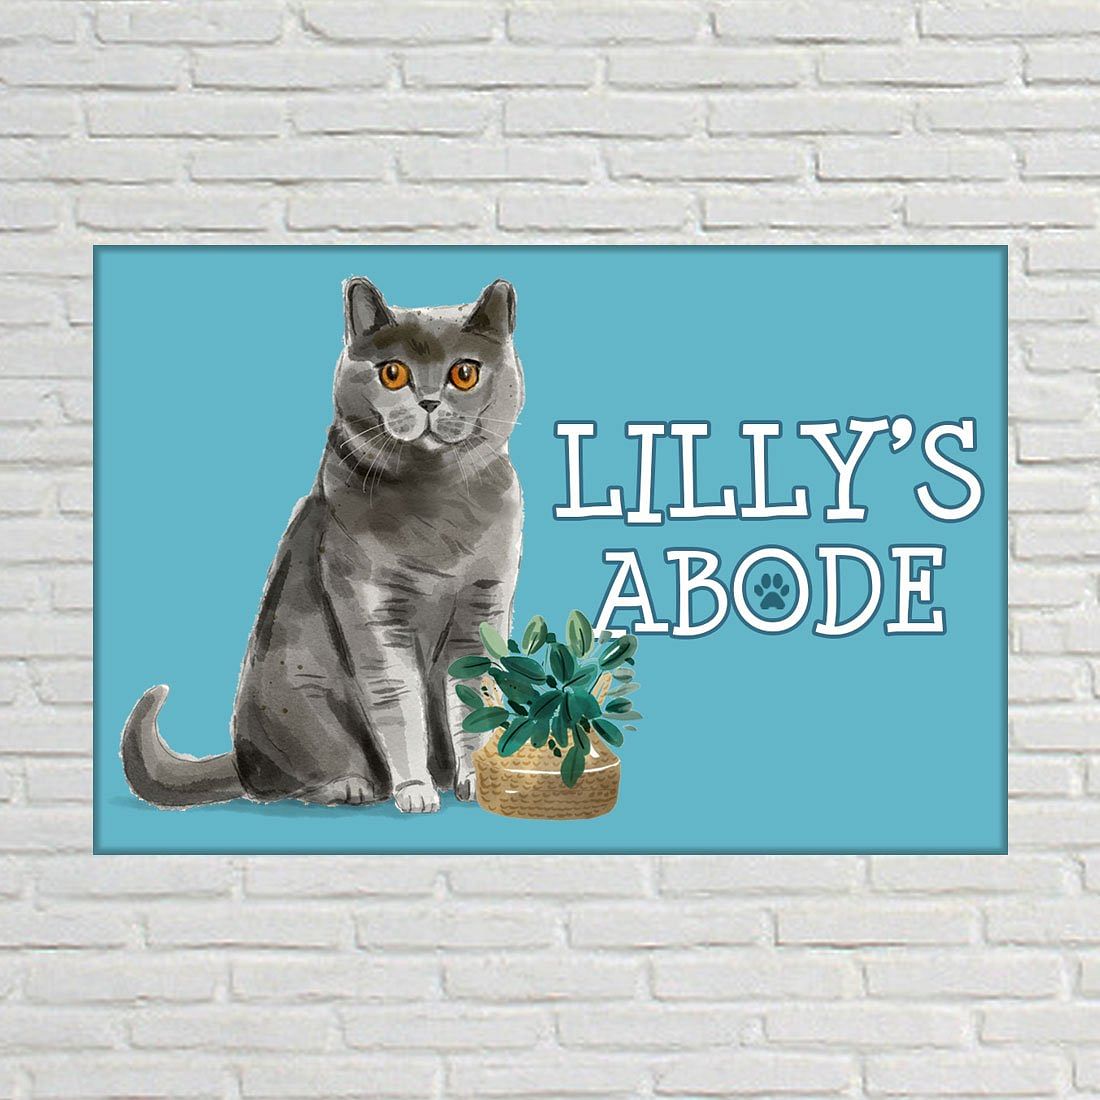 Nutcase Personalized Cat Name Plate Customzied Beware Of Cat Sign Board Home Door Plaque - Cute British_Shorthair Nutcase